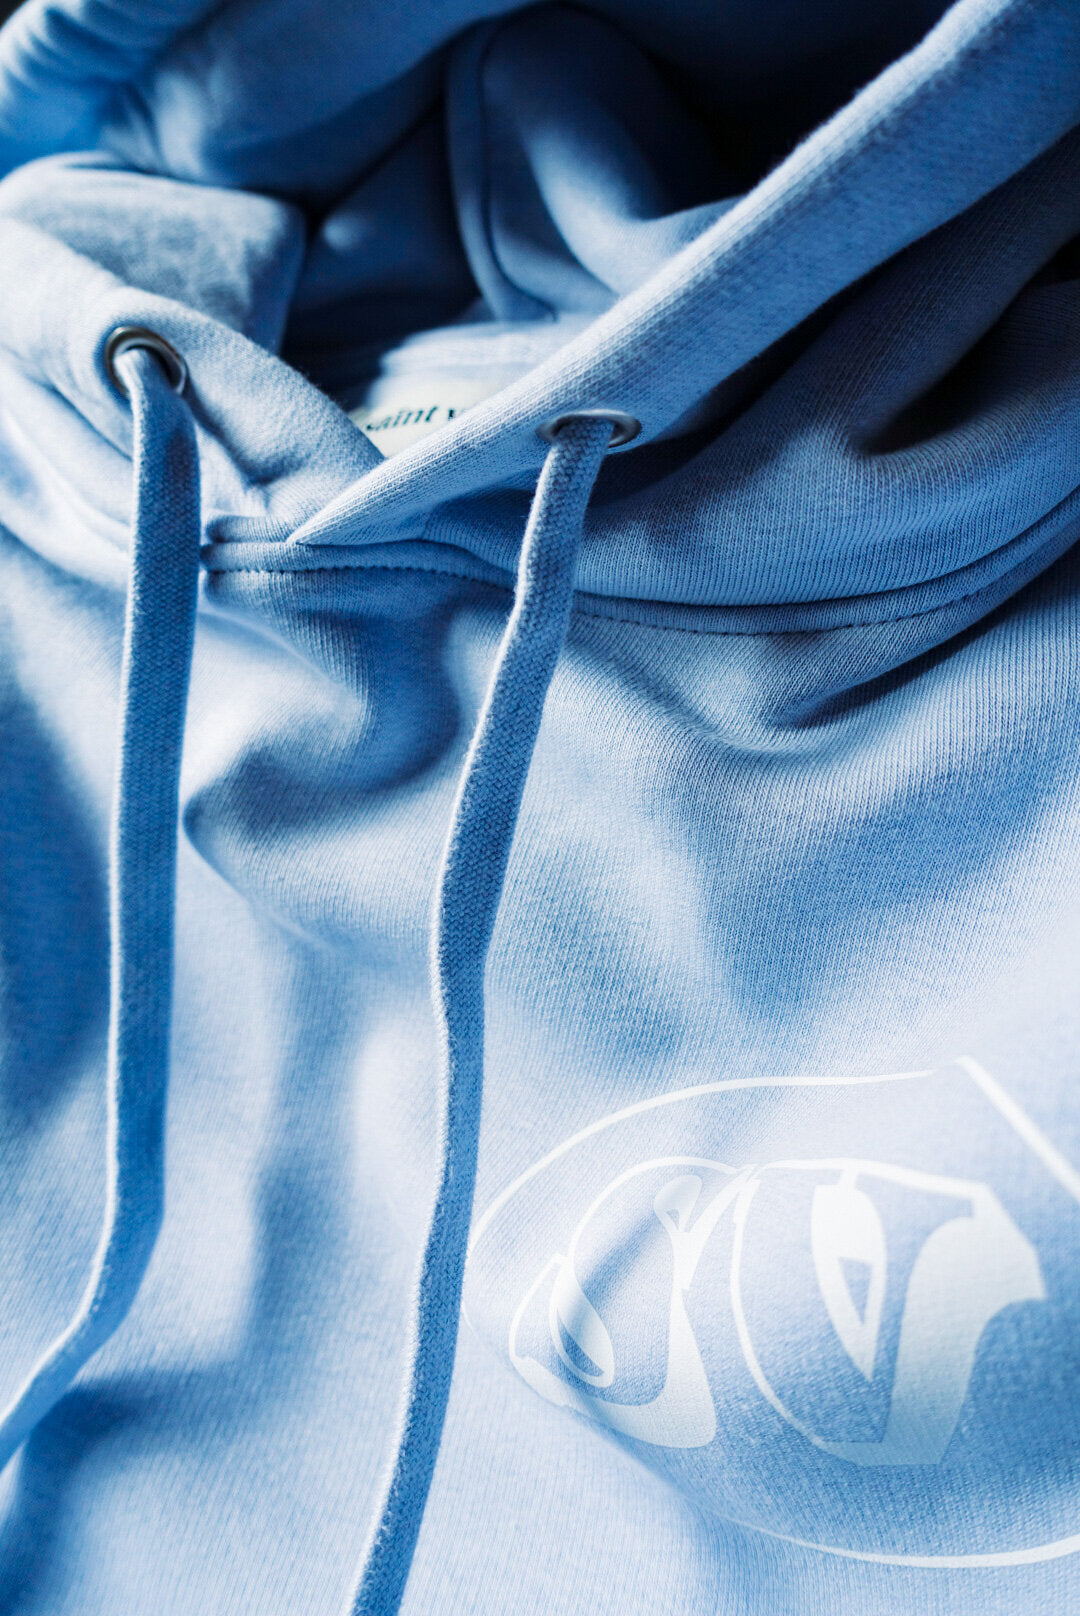 
                  
                    SV Bubble Hoodie - Baby Blue
                  
                